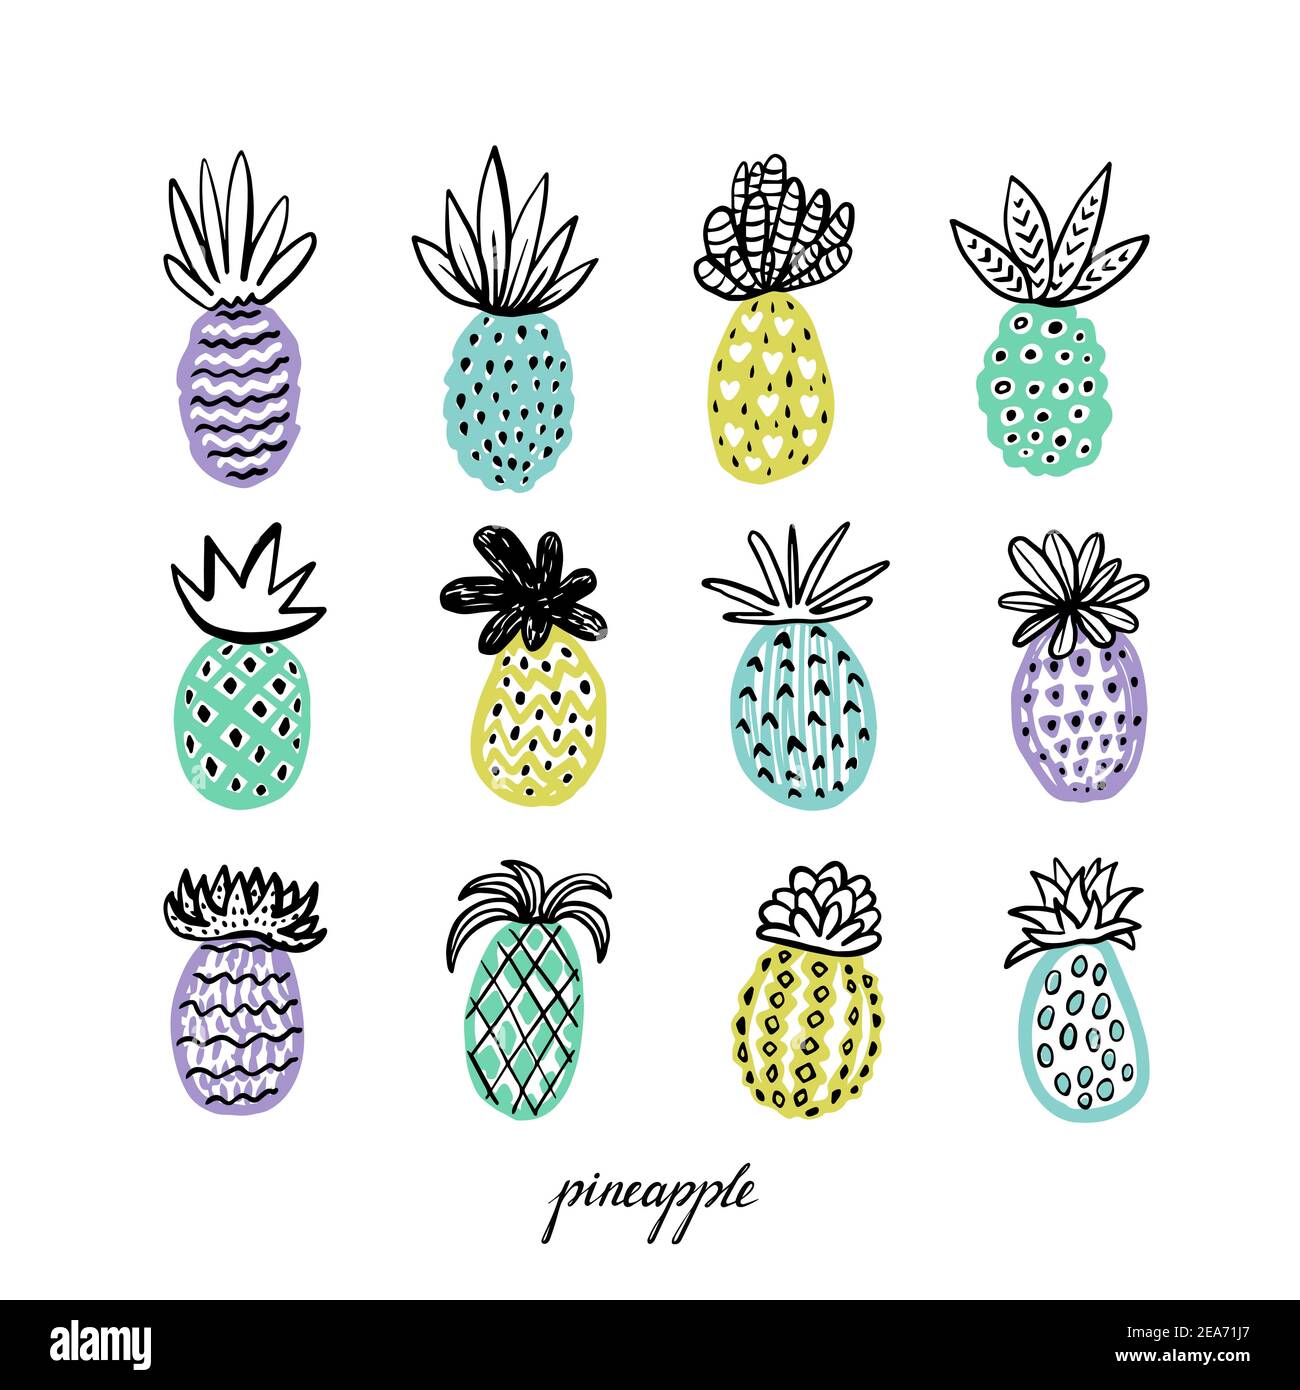 Set of pineapples. Hand drawn Decorative Pineapple with different textures in pastel colors, yellow, teal, blue-violet. Exotic fruits on white background Stock Vector